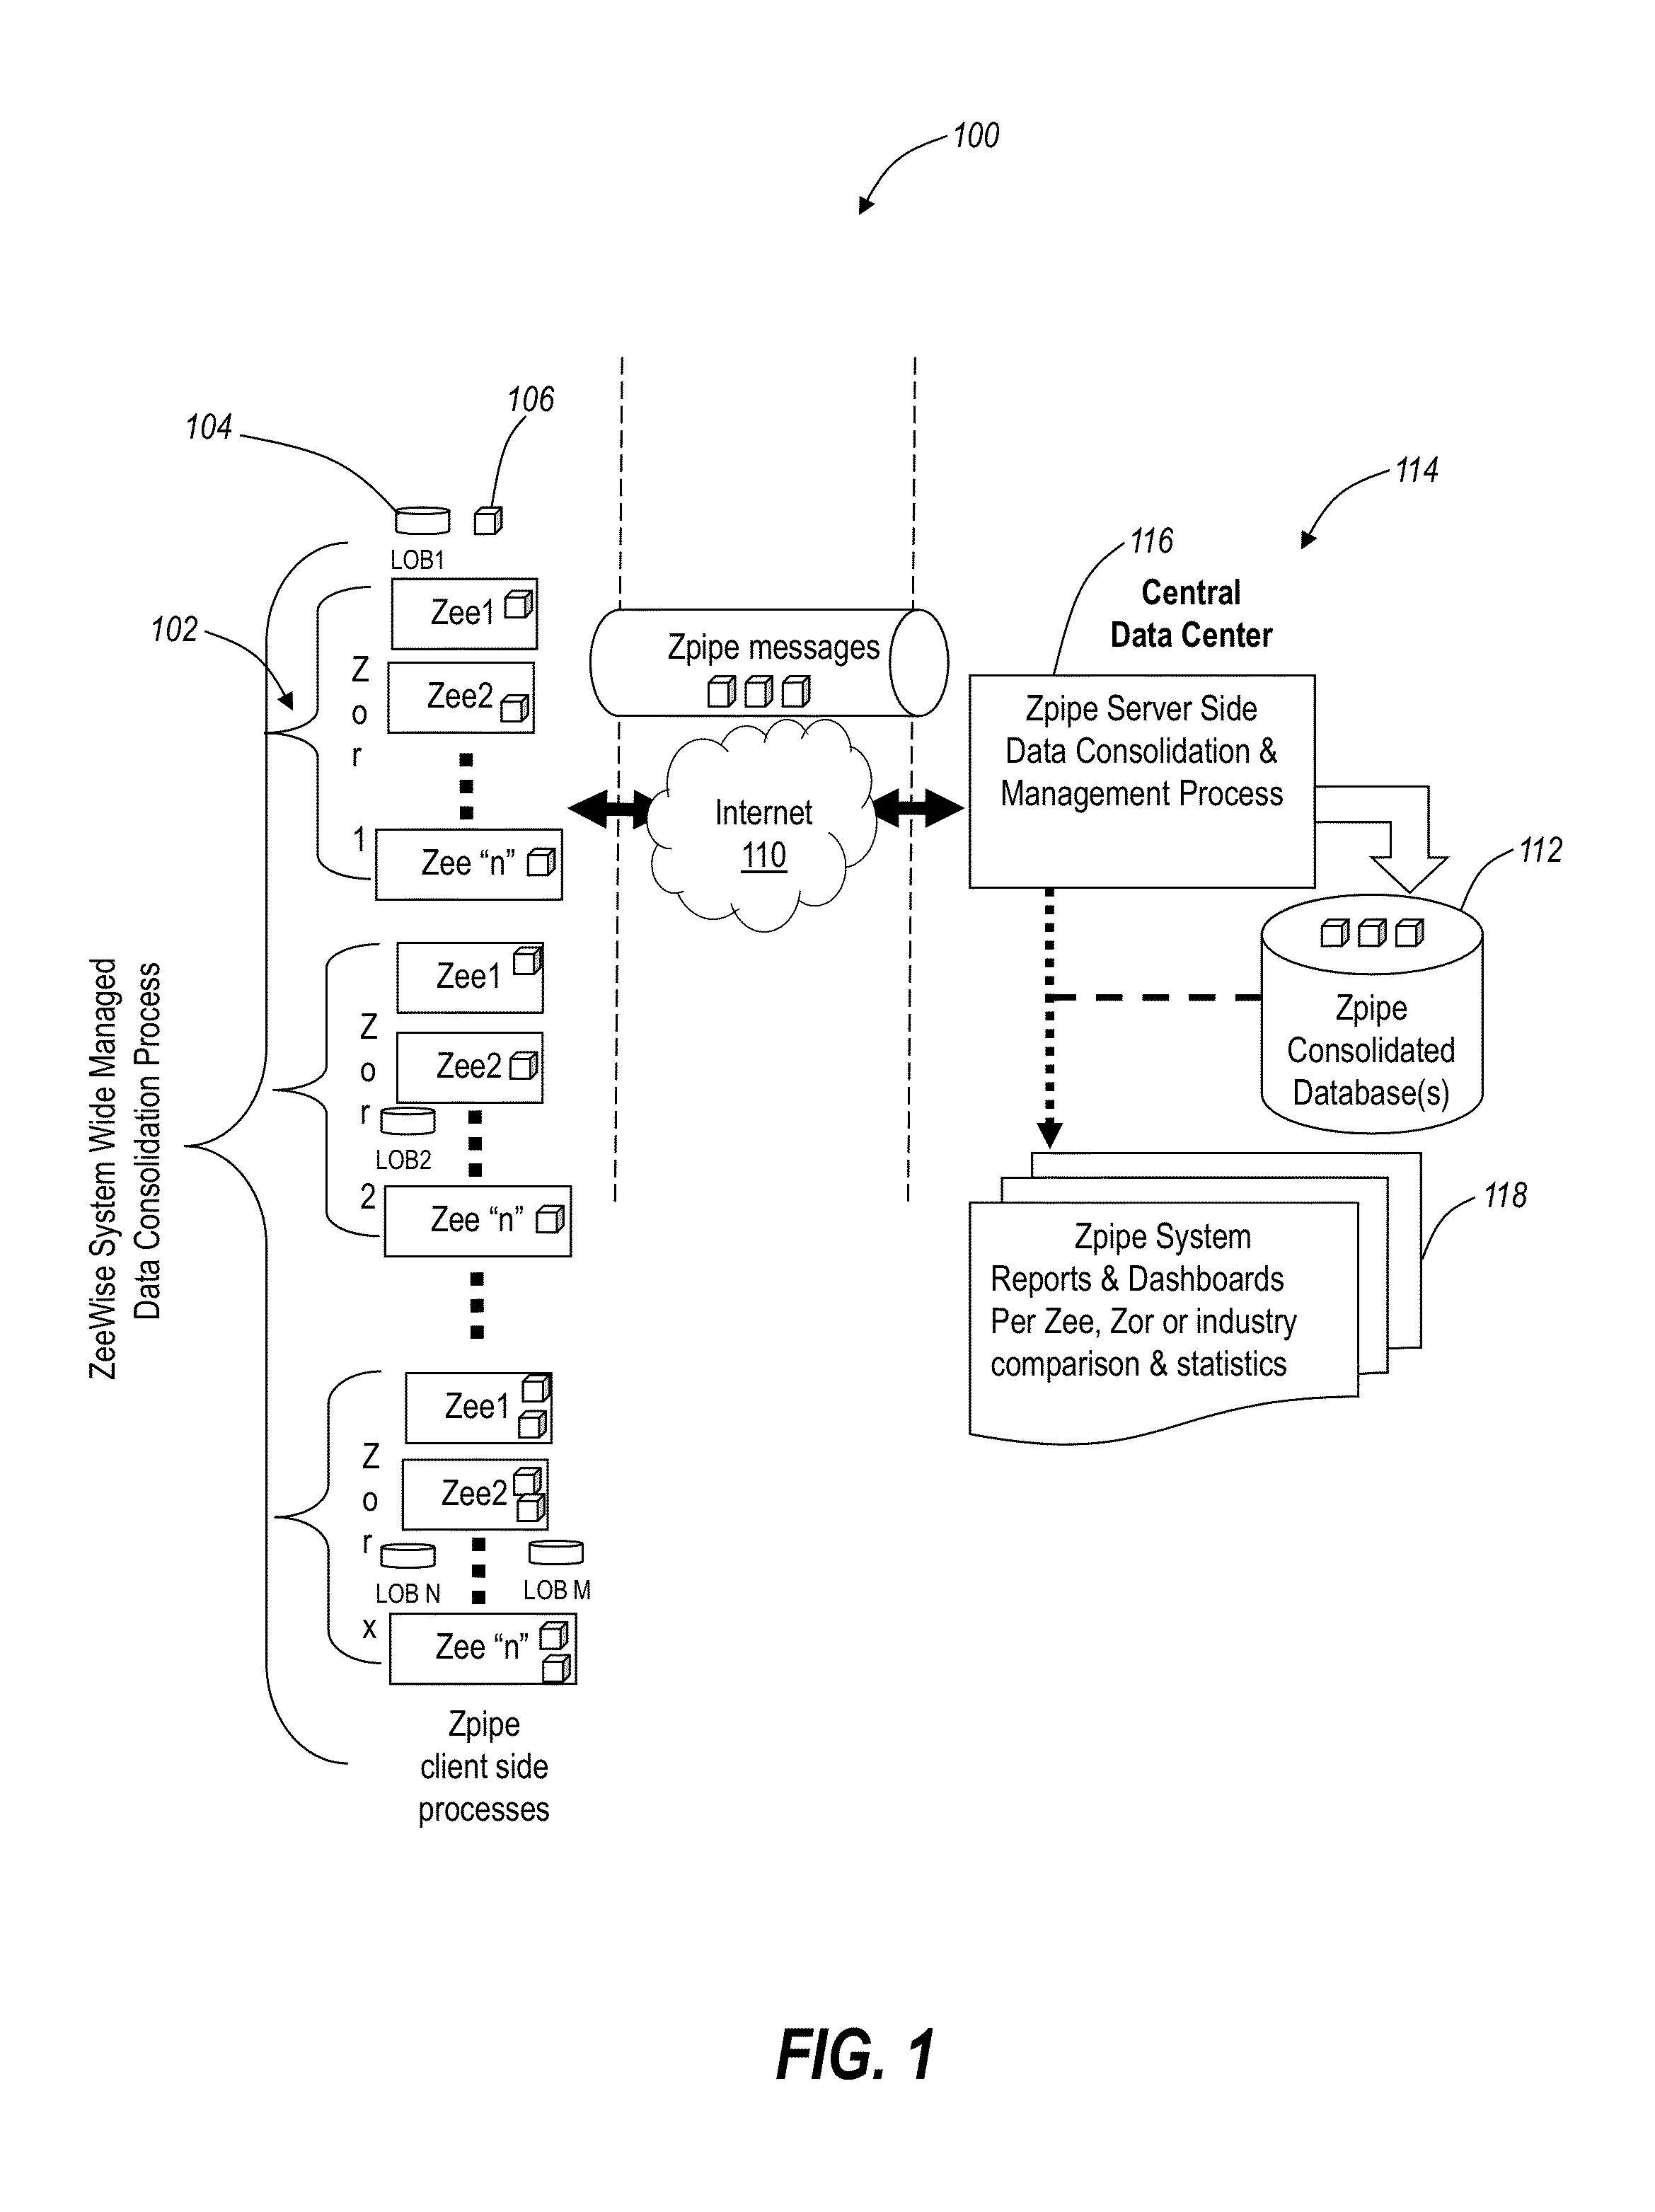 Systems and methods for collection and consolidation of heterogeneous remote business data using dynamic data handling